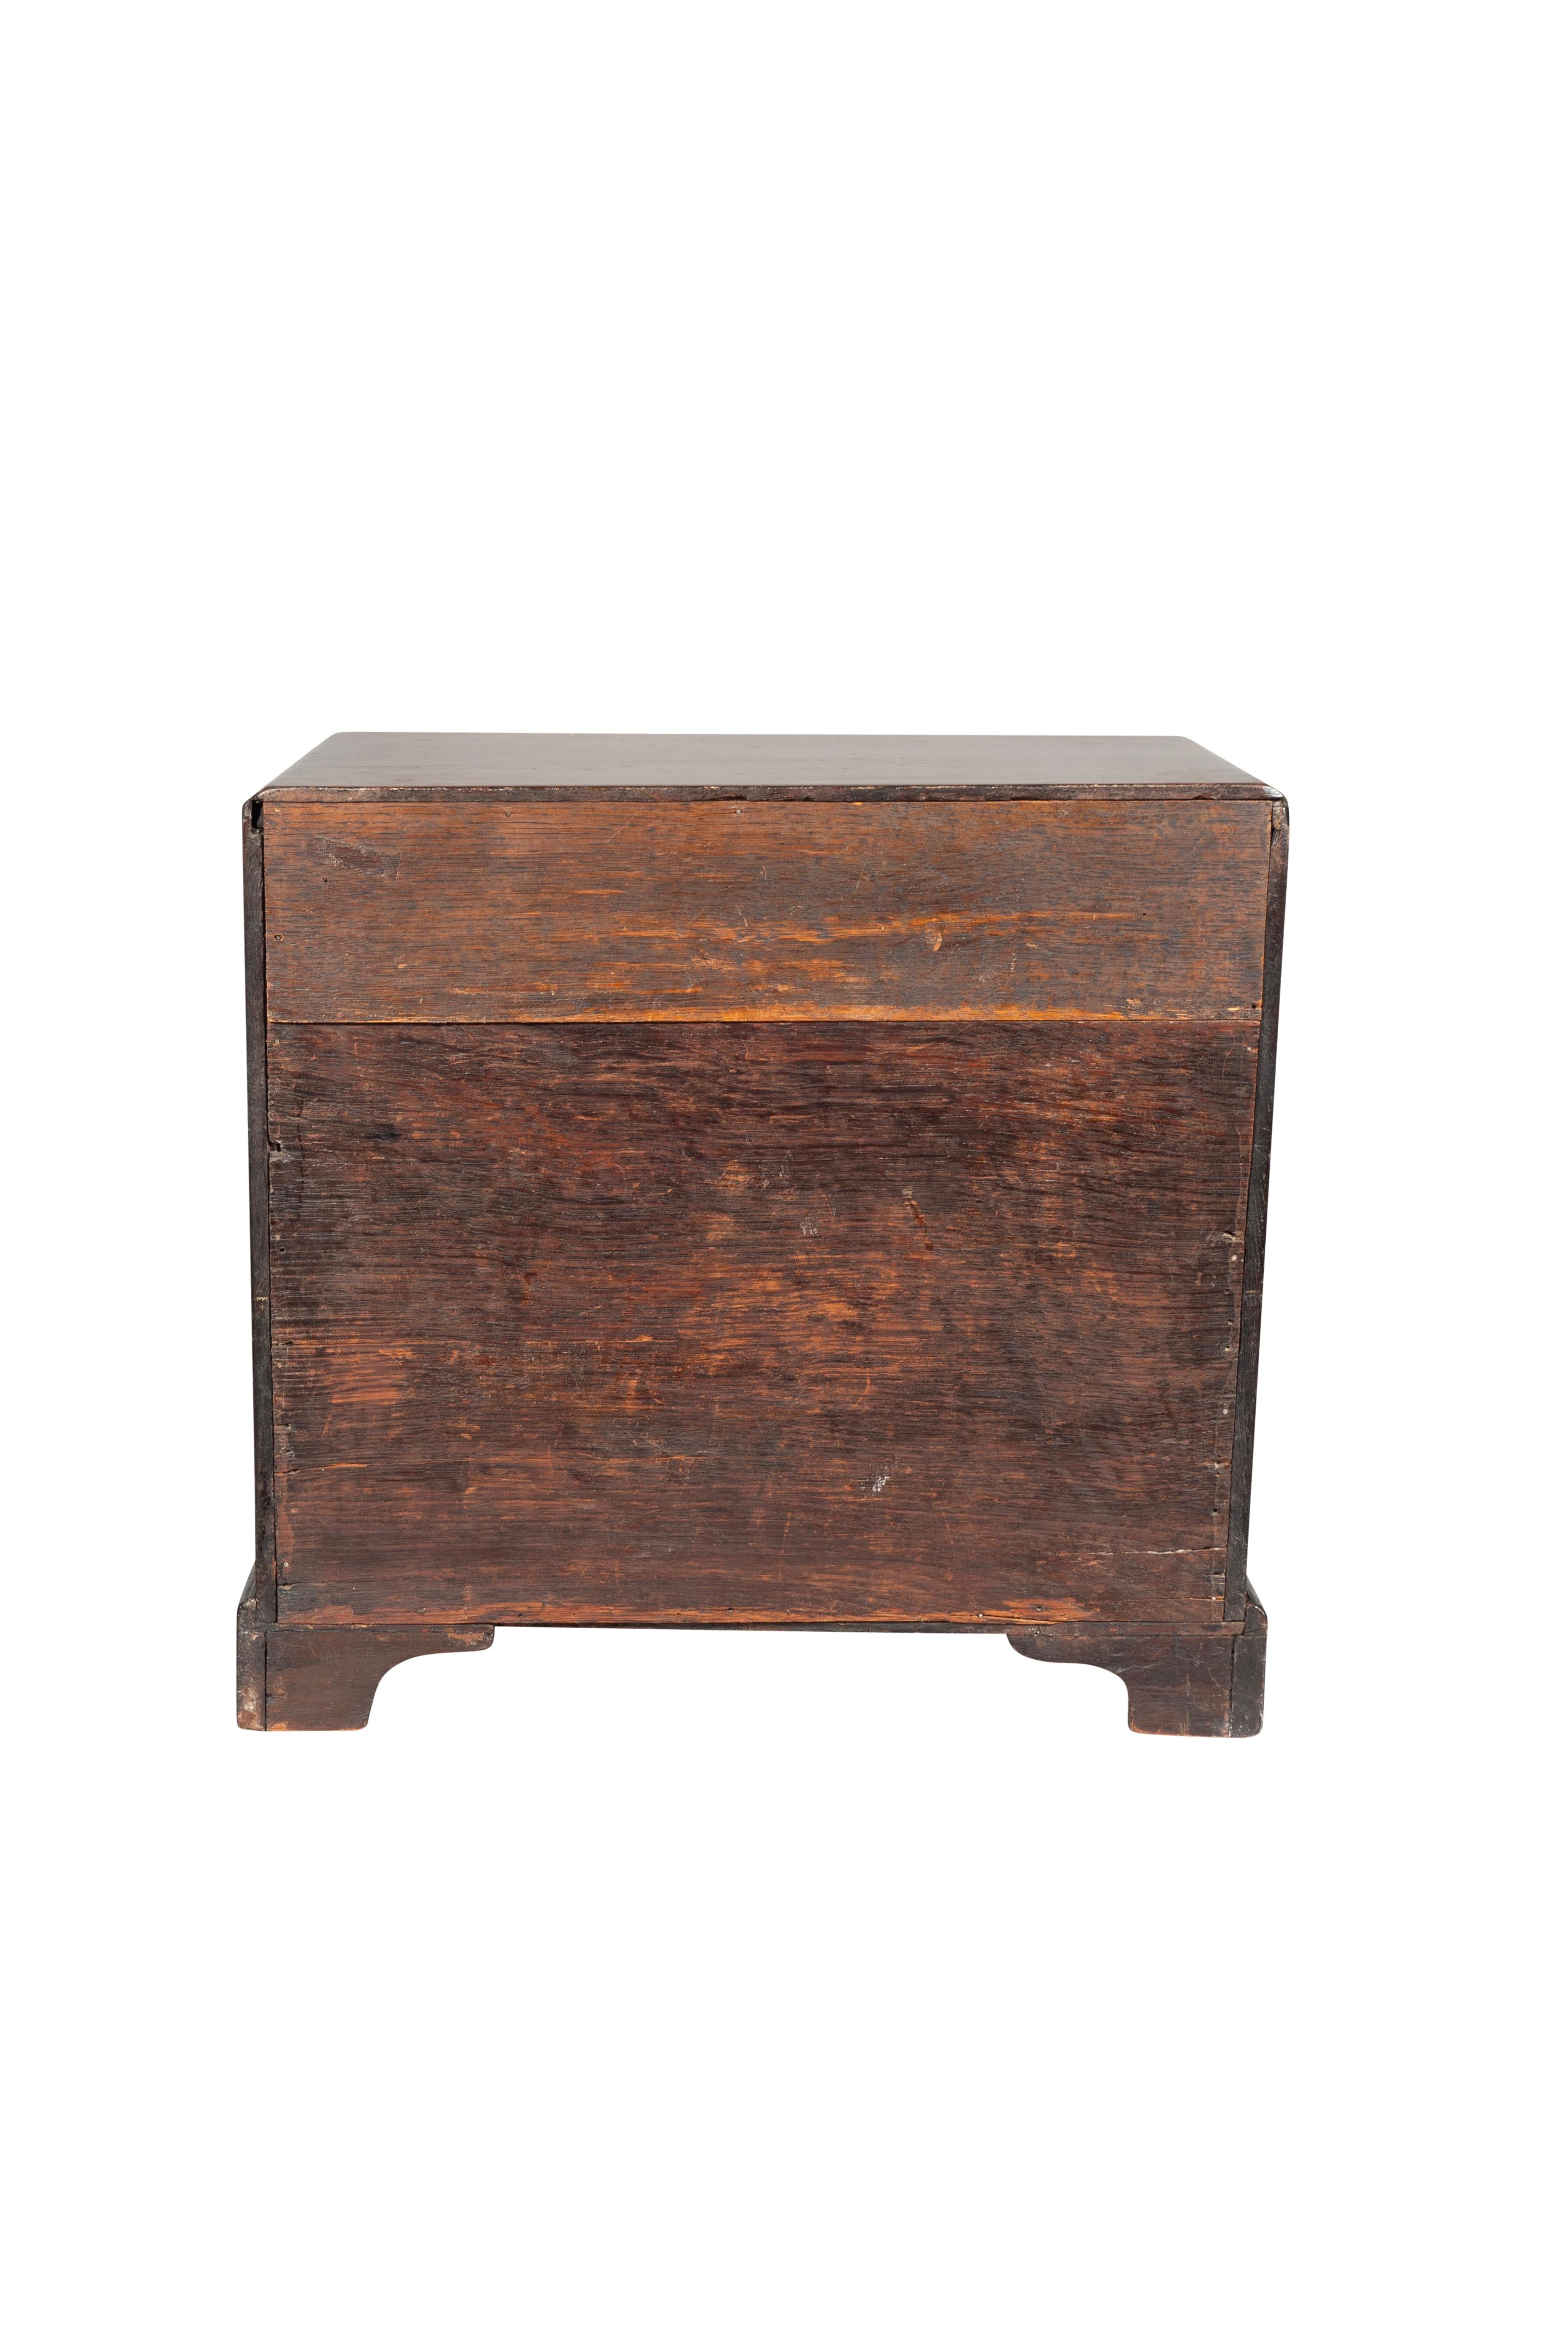 George III Mahogany Miniature Chest Of Drawers In Good Condition For Sale In Essex, MA